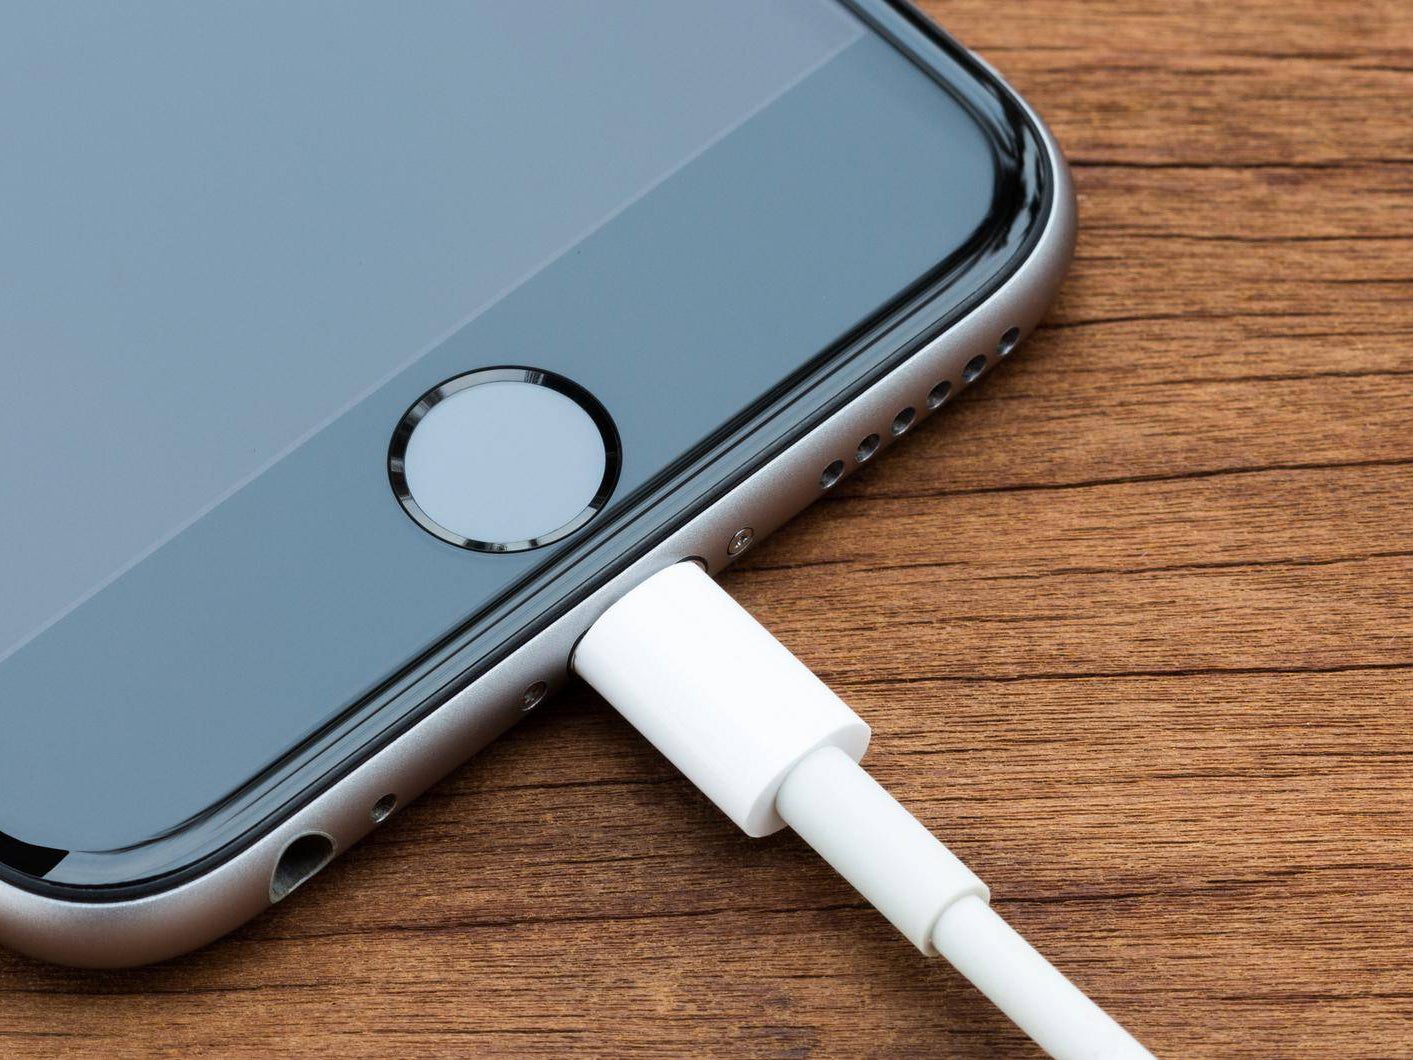 A file photo shows an iPhone charging cable. It was unclear whether Le Thi Xoan's cable was an Apple or third-party version